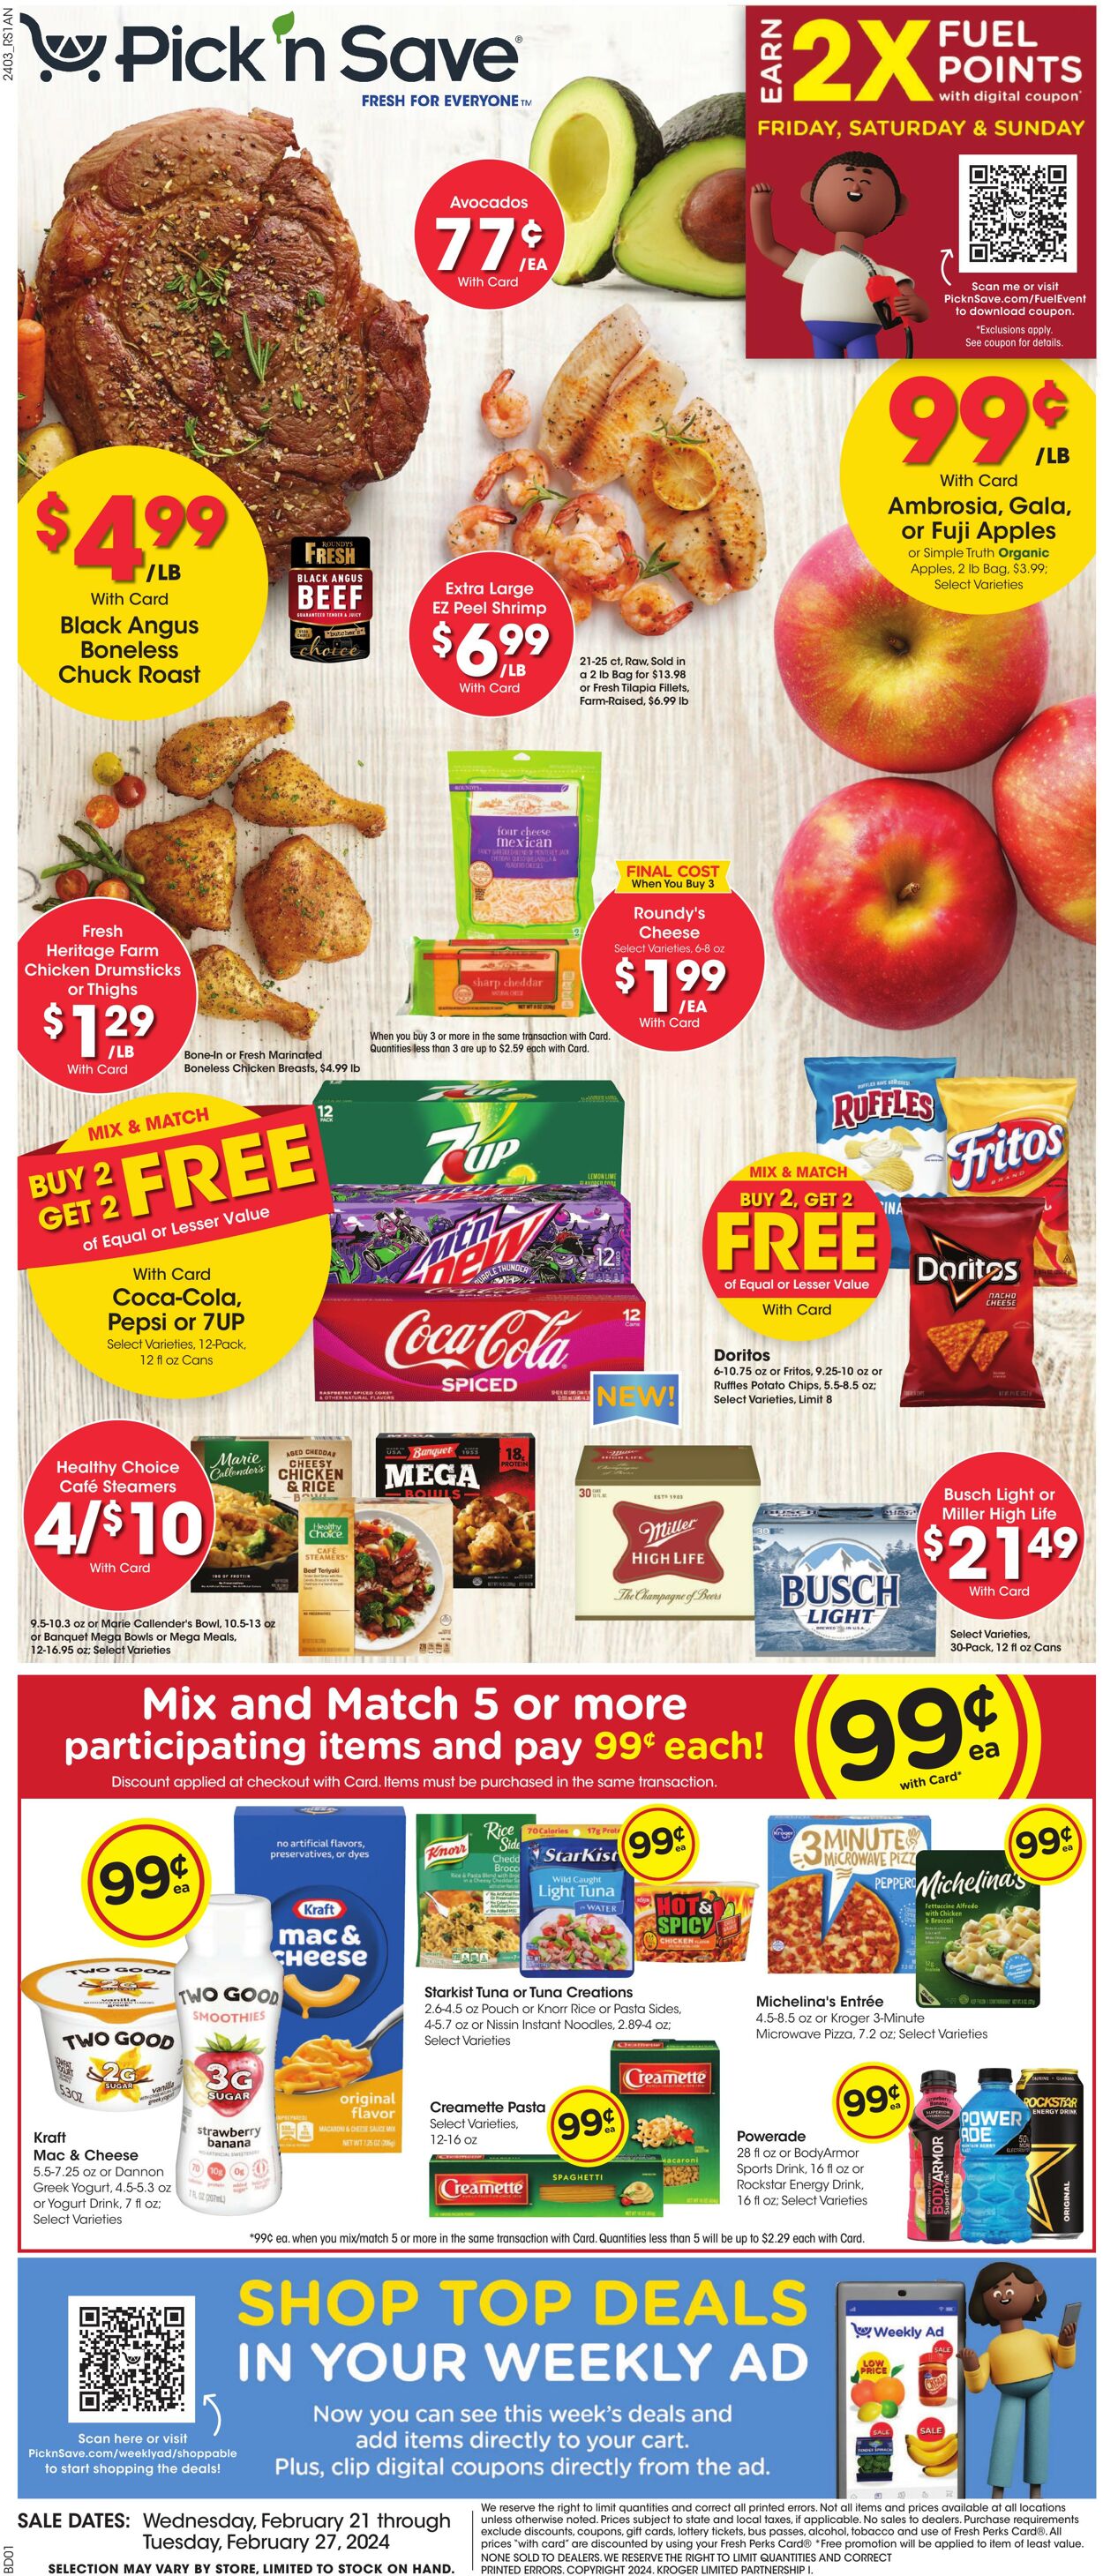 Pick'n'Save Promotional weekly ads